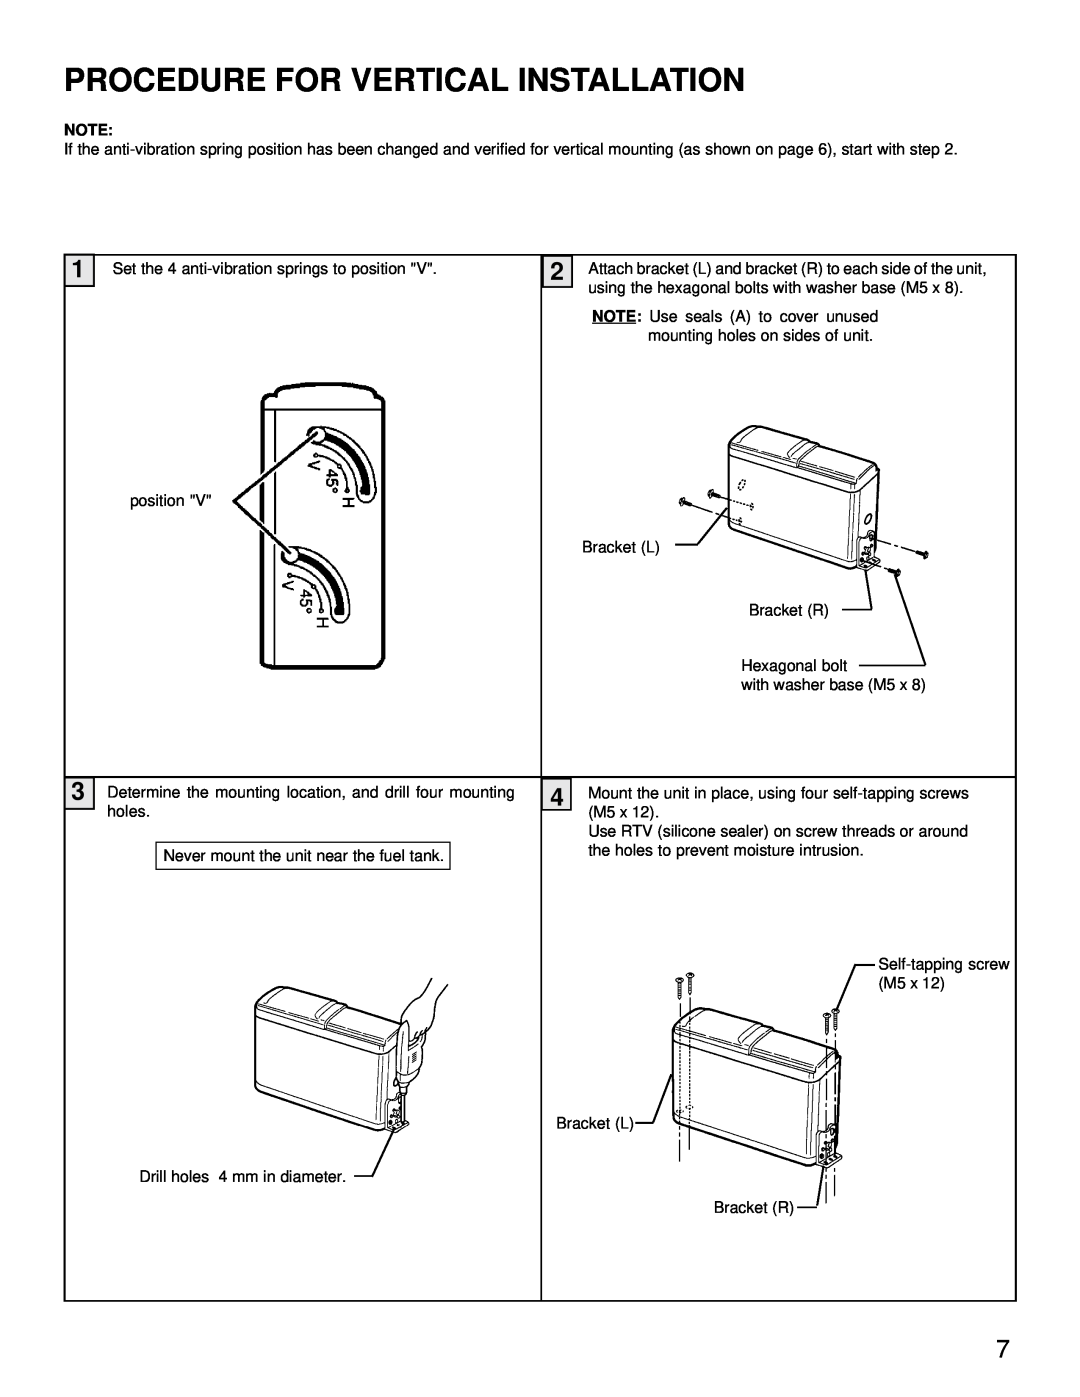 Audiovox ACC56, ACC-56 owner manual Procedure For Vertical Installation 